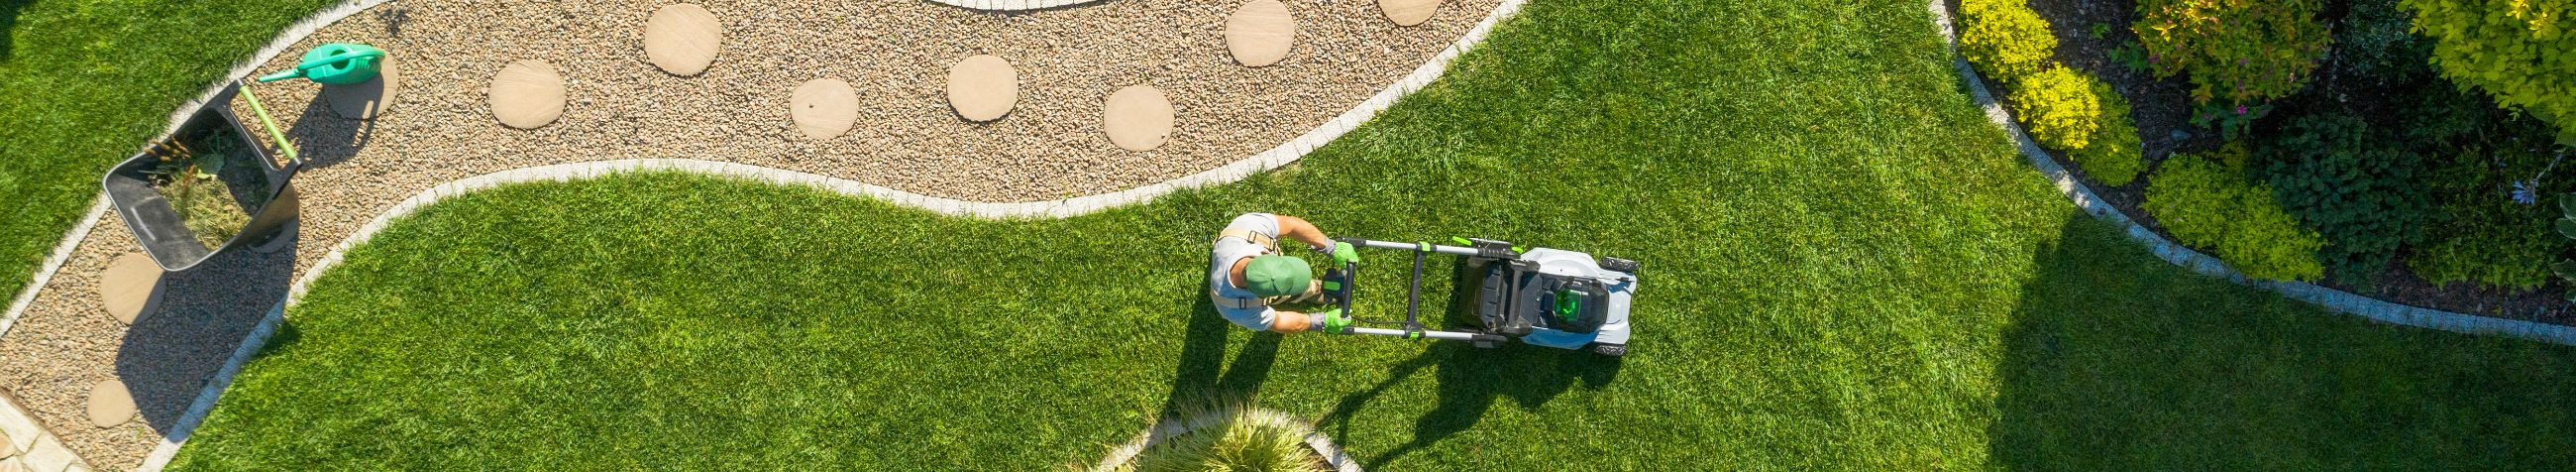 tree care services, biodegradable flower coverings, construction, repair and auxiliary work in the garden or on the plot, TRANSPORT SERVICES, consulation, landscape and garden design, grass care, floral carpets, cutting on the hedges, mowing the lawn